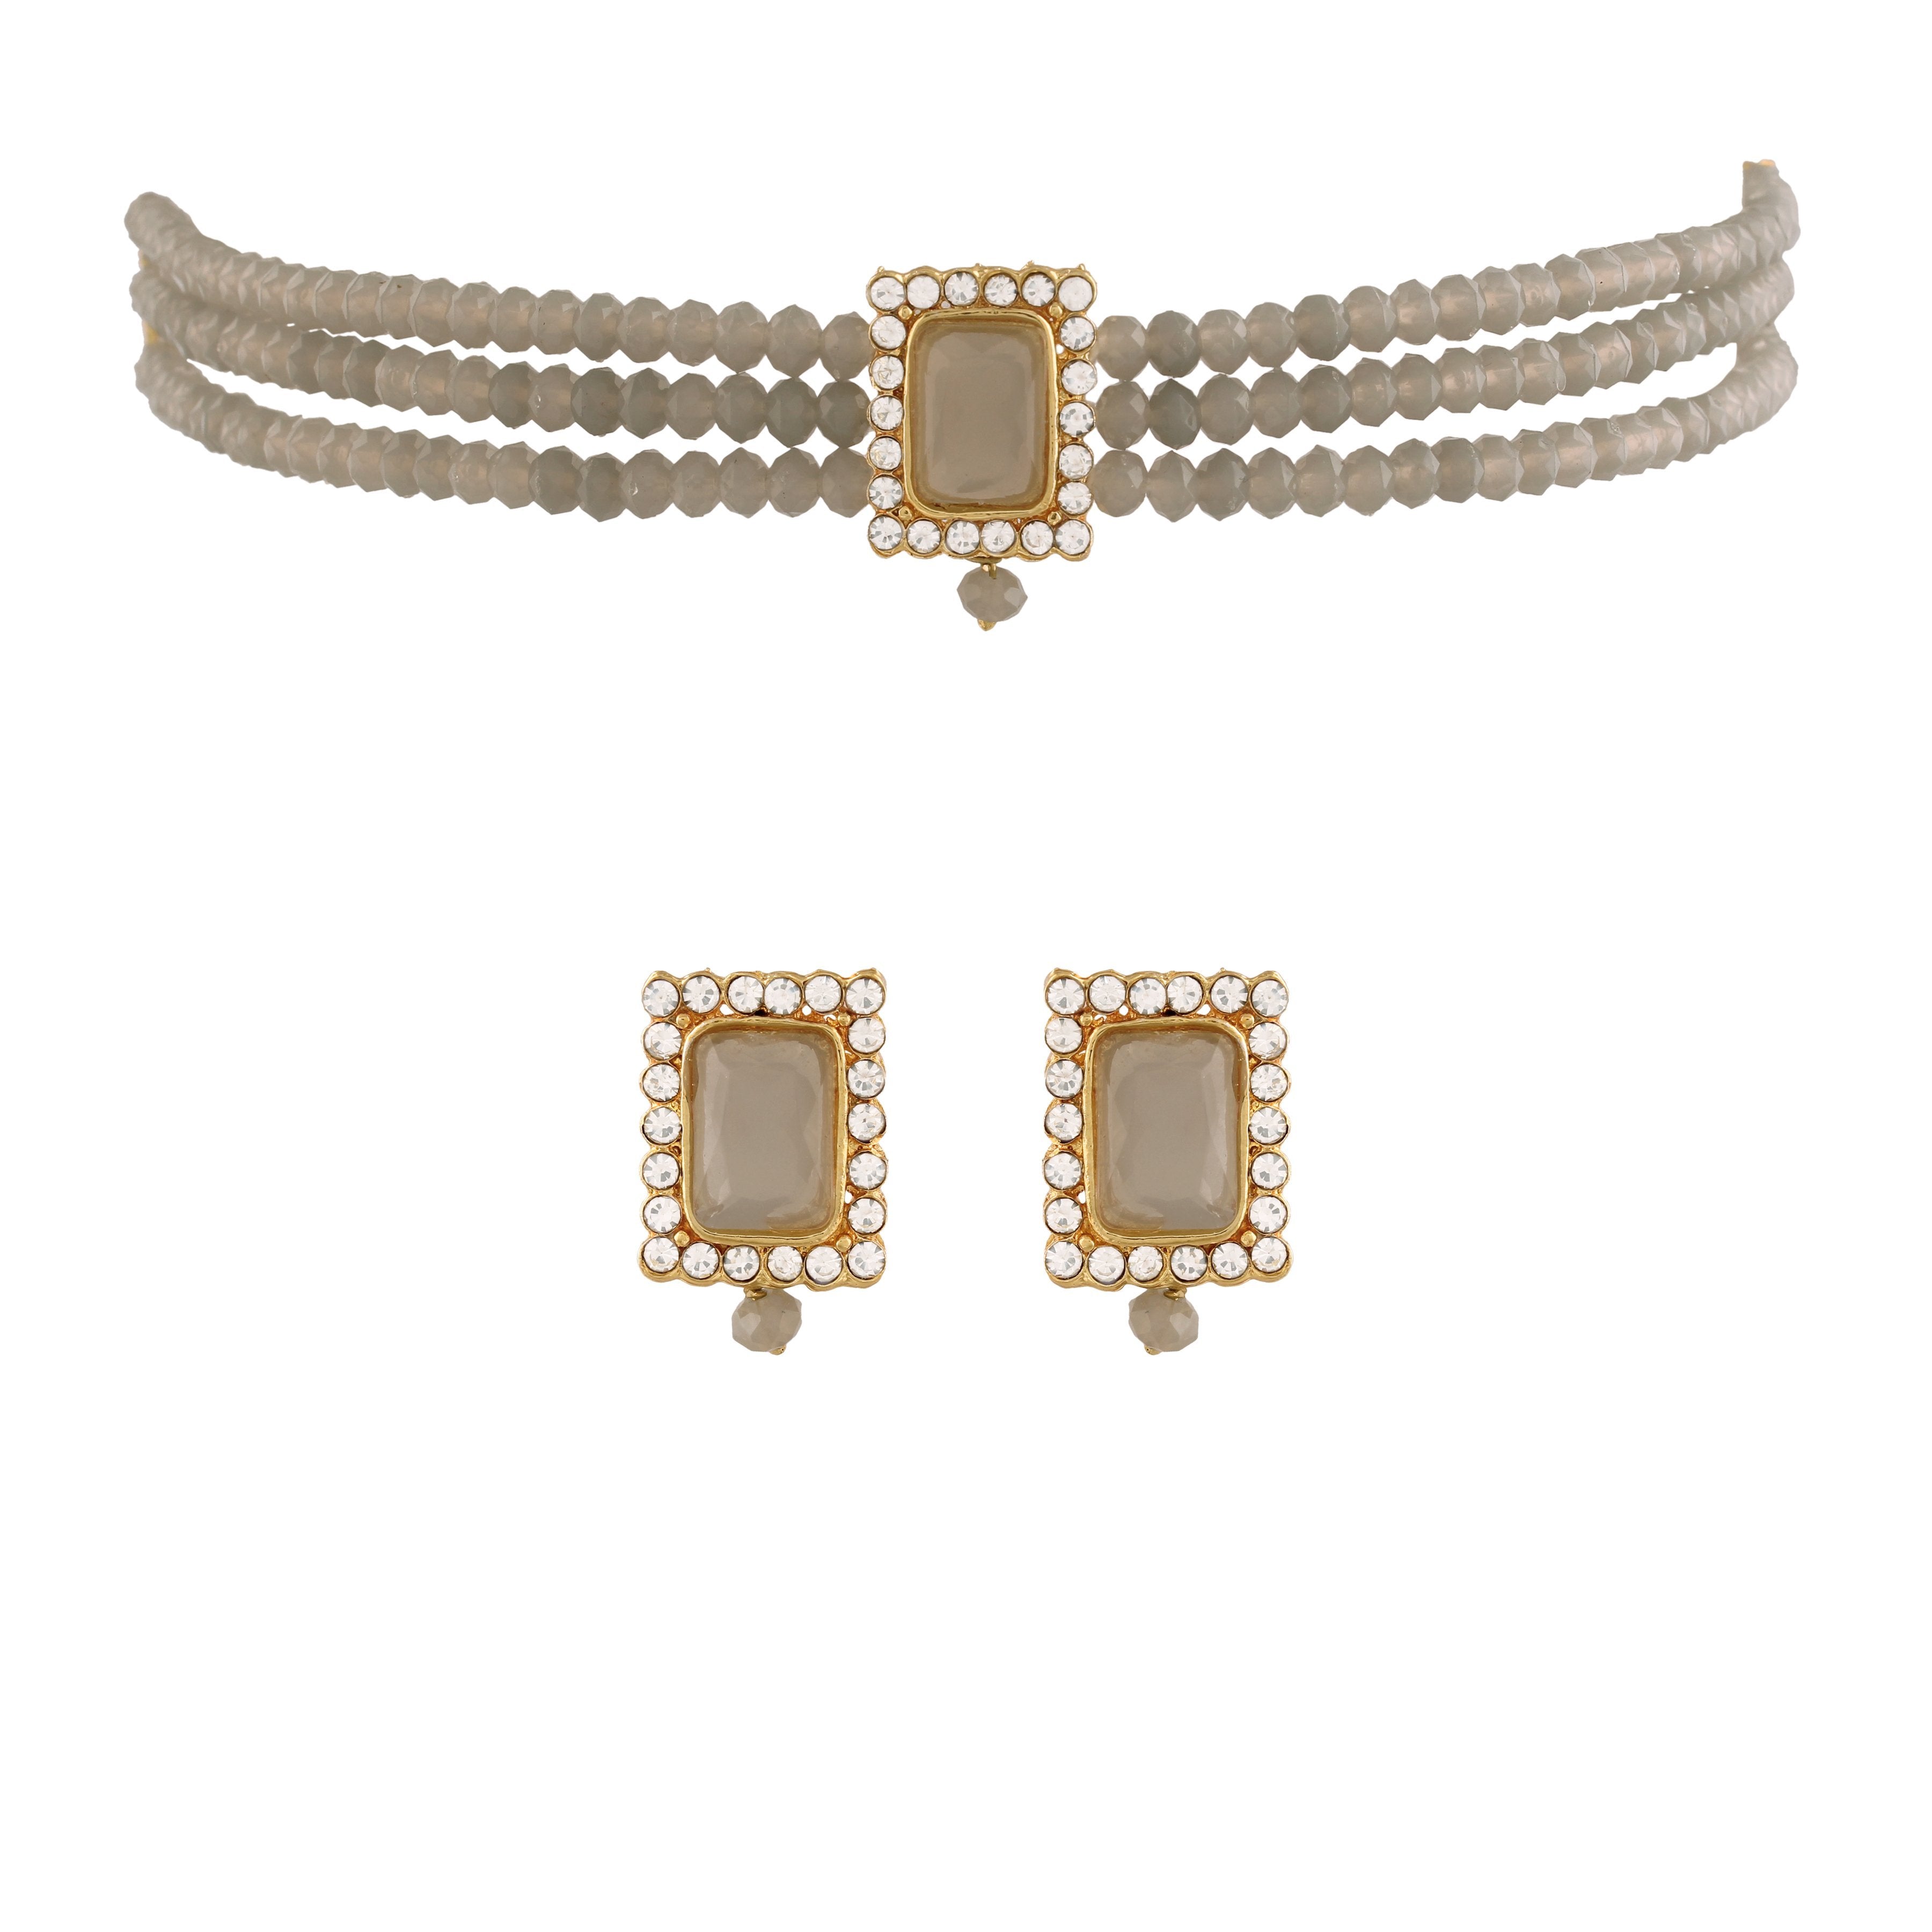 Women's  Gold Plated  Handcrafted Crystal Stone Studded Choker Necklace Jewellery Set With Earrings - i jewels